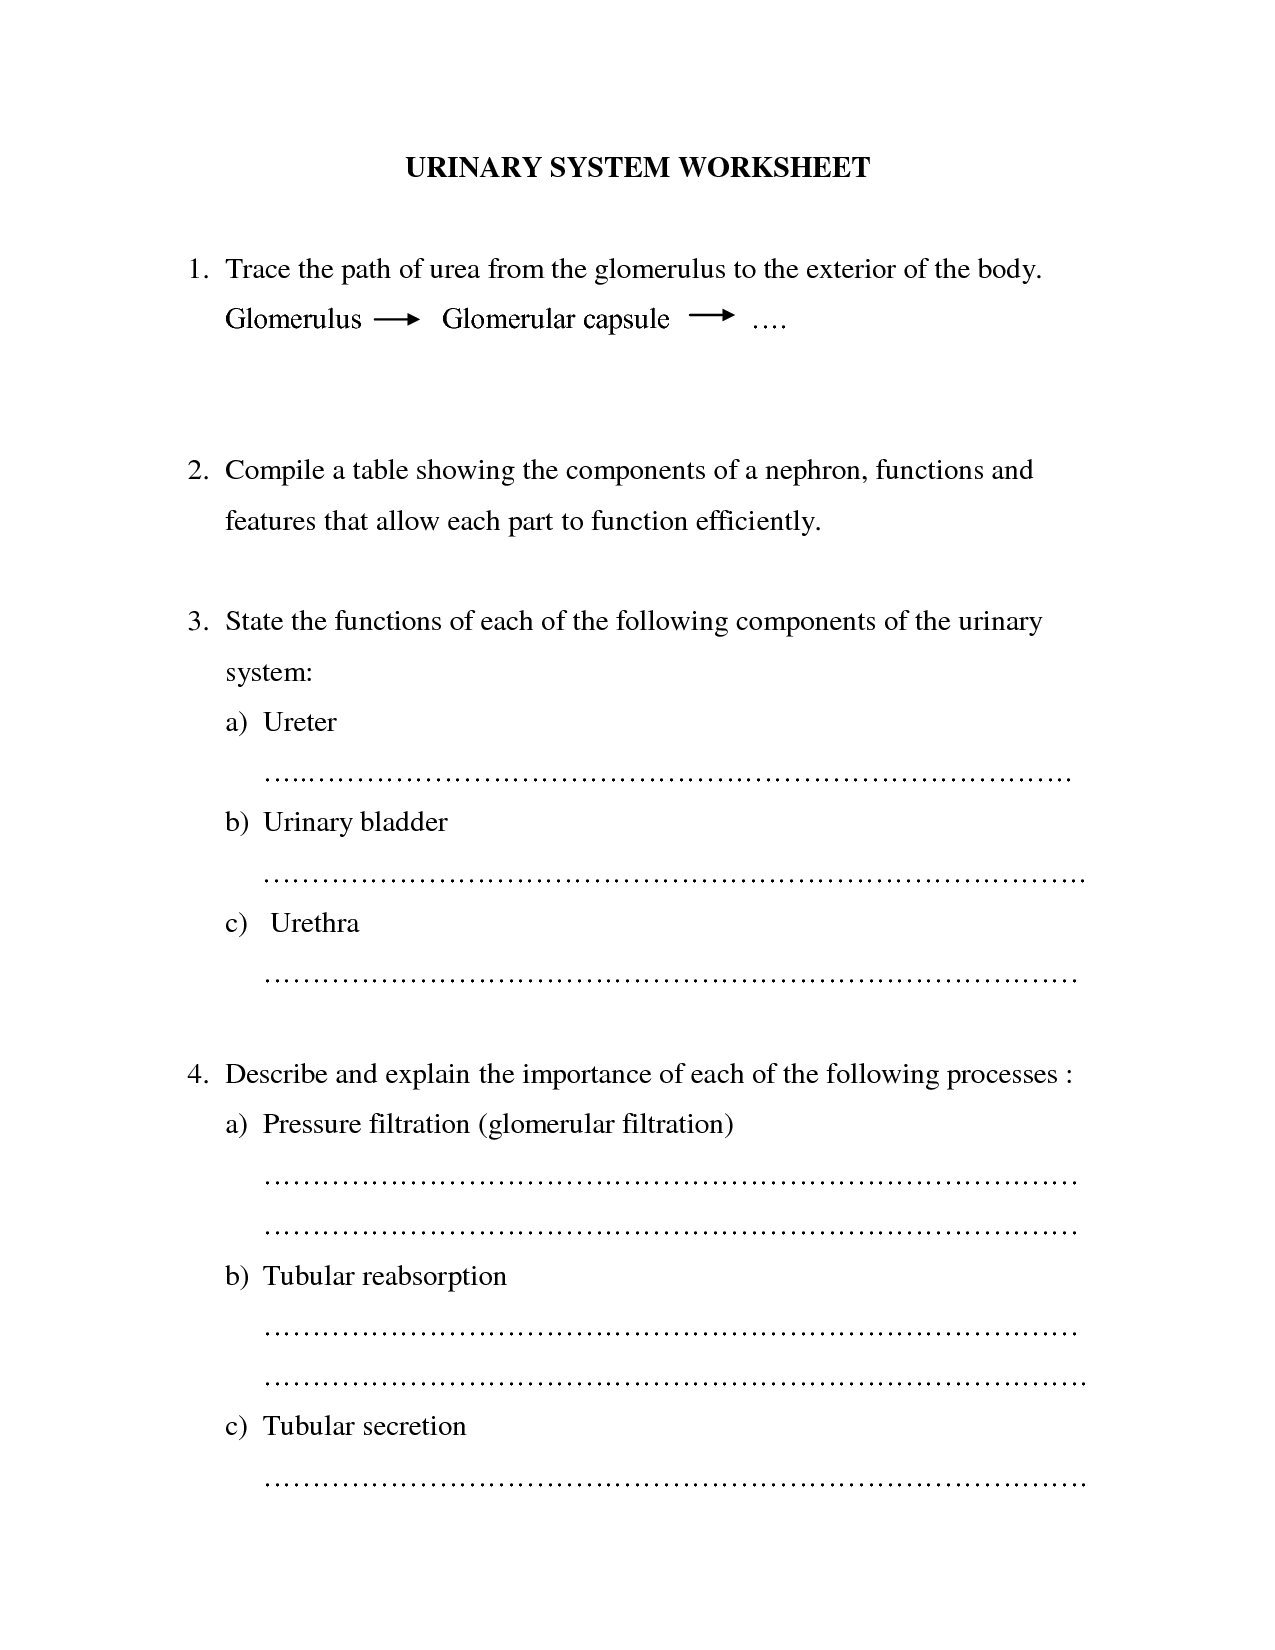 Urinary System Worksheet Answers Image